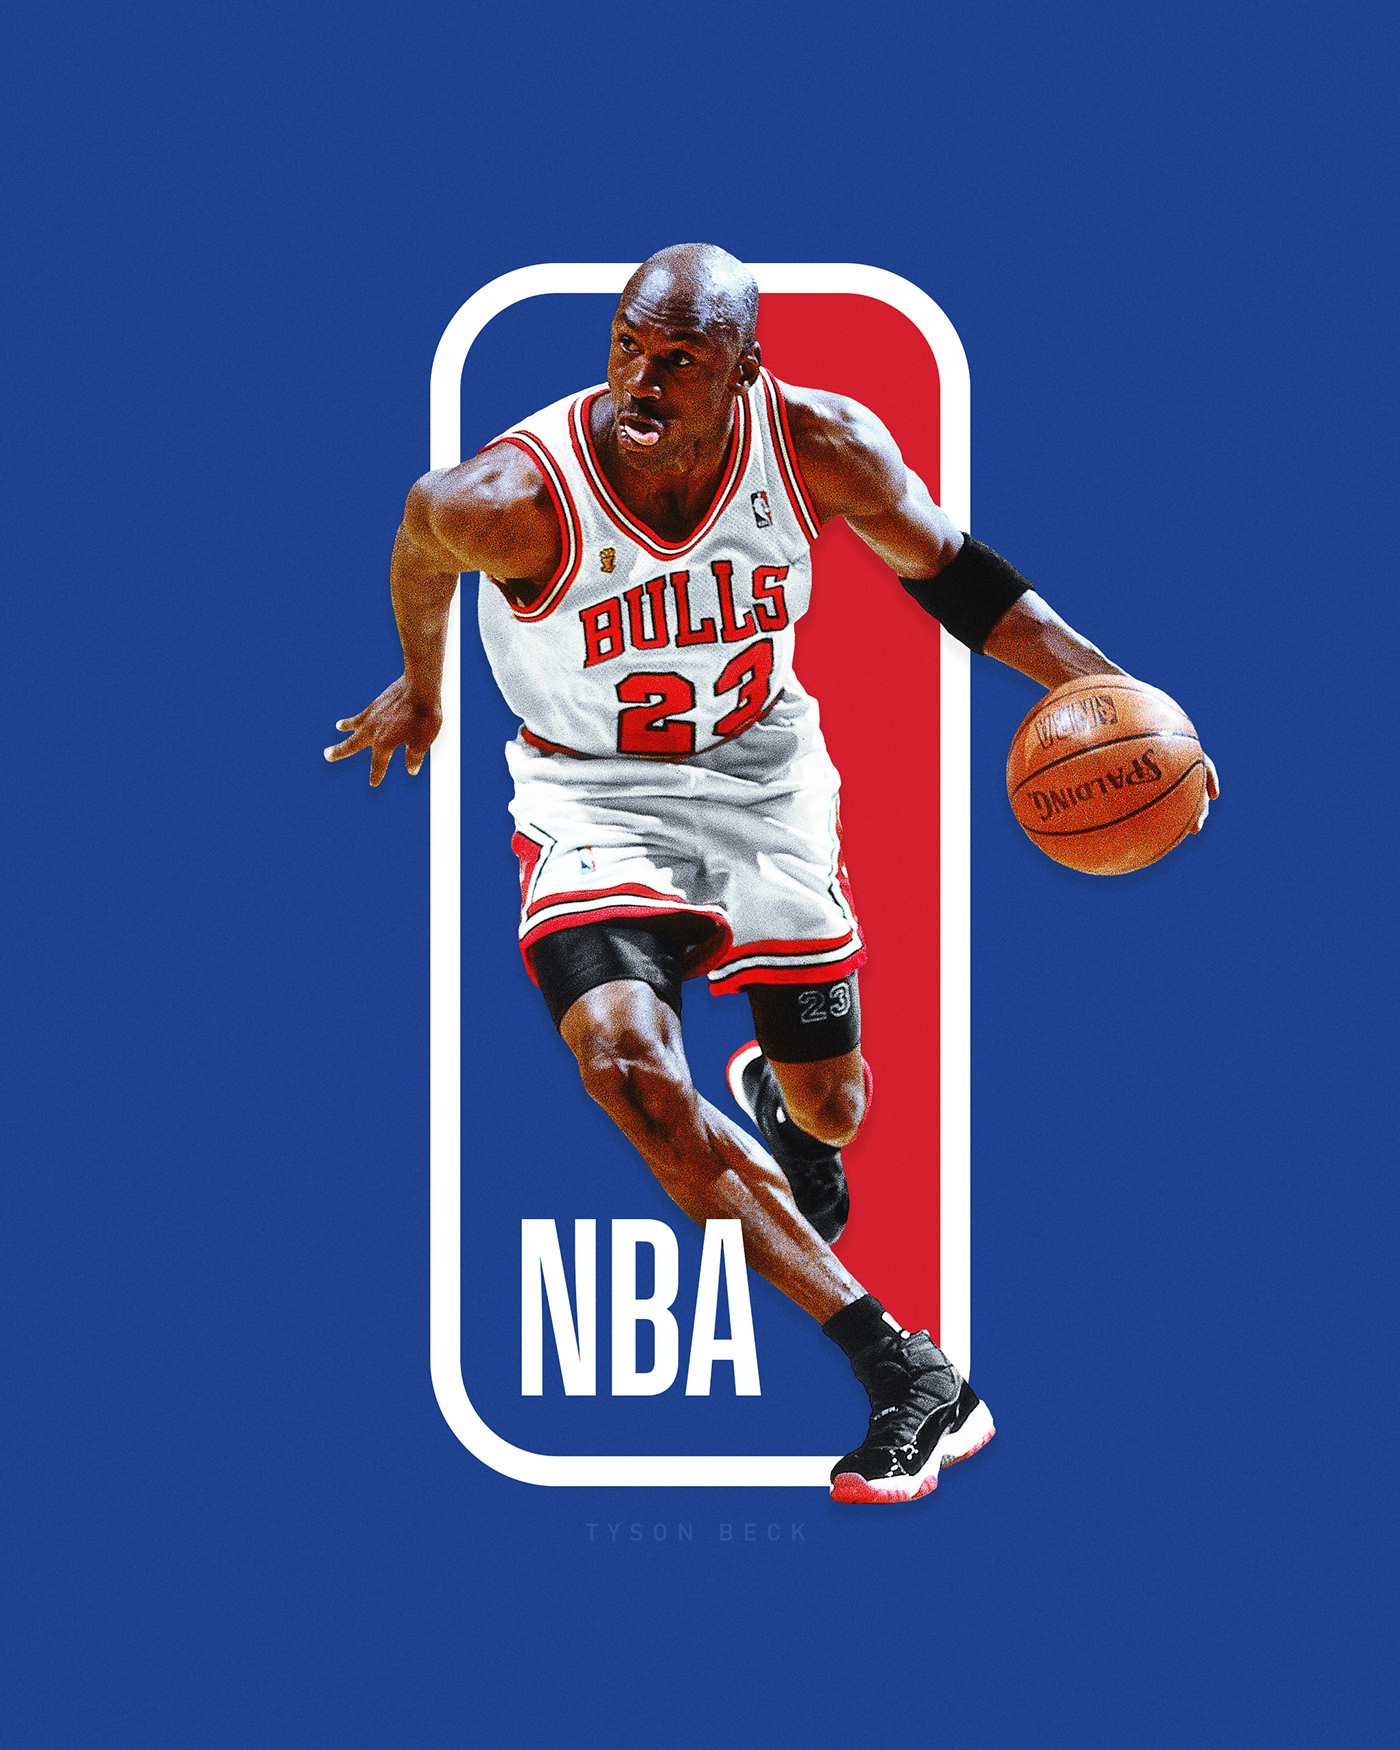 Top 103+ Images who is the guy on the nba logo Excellent